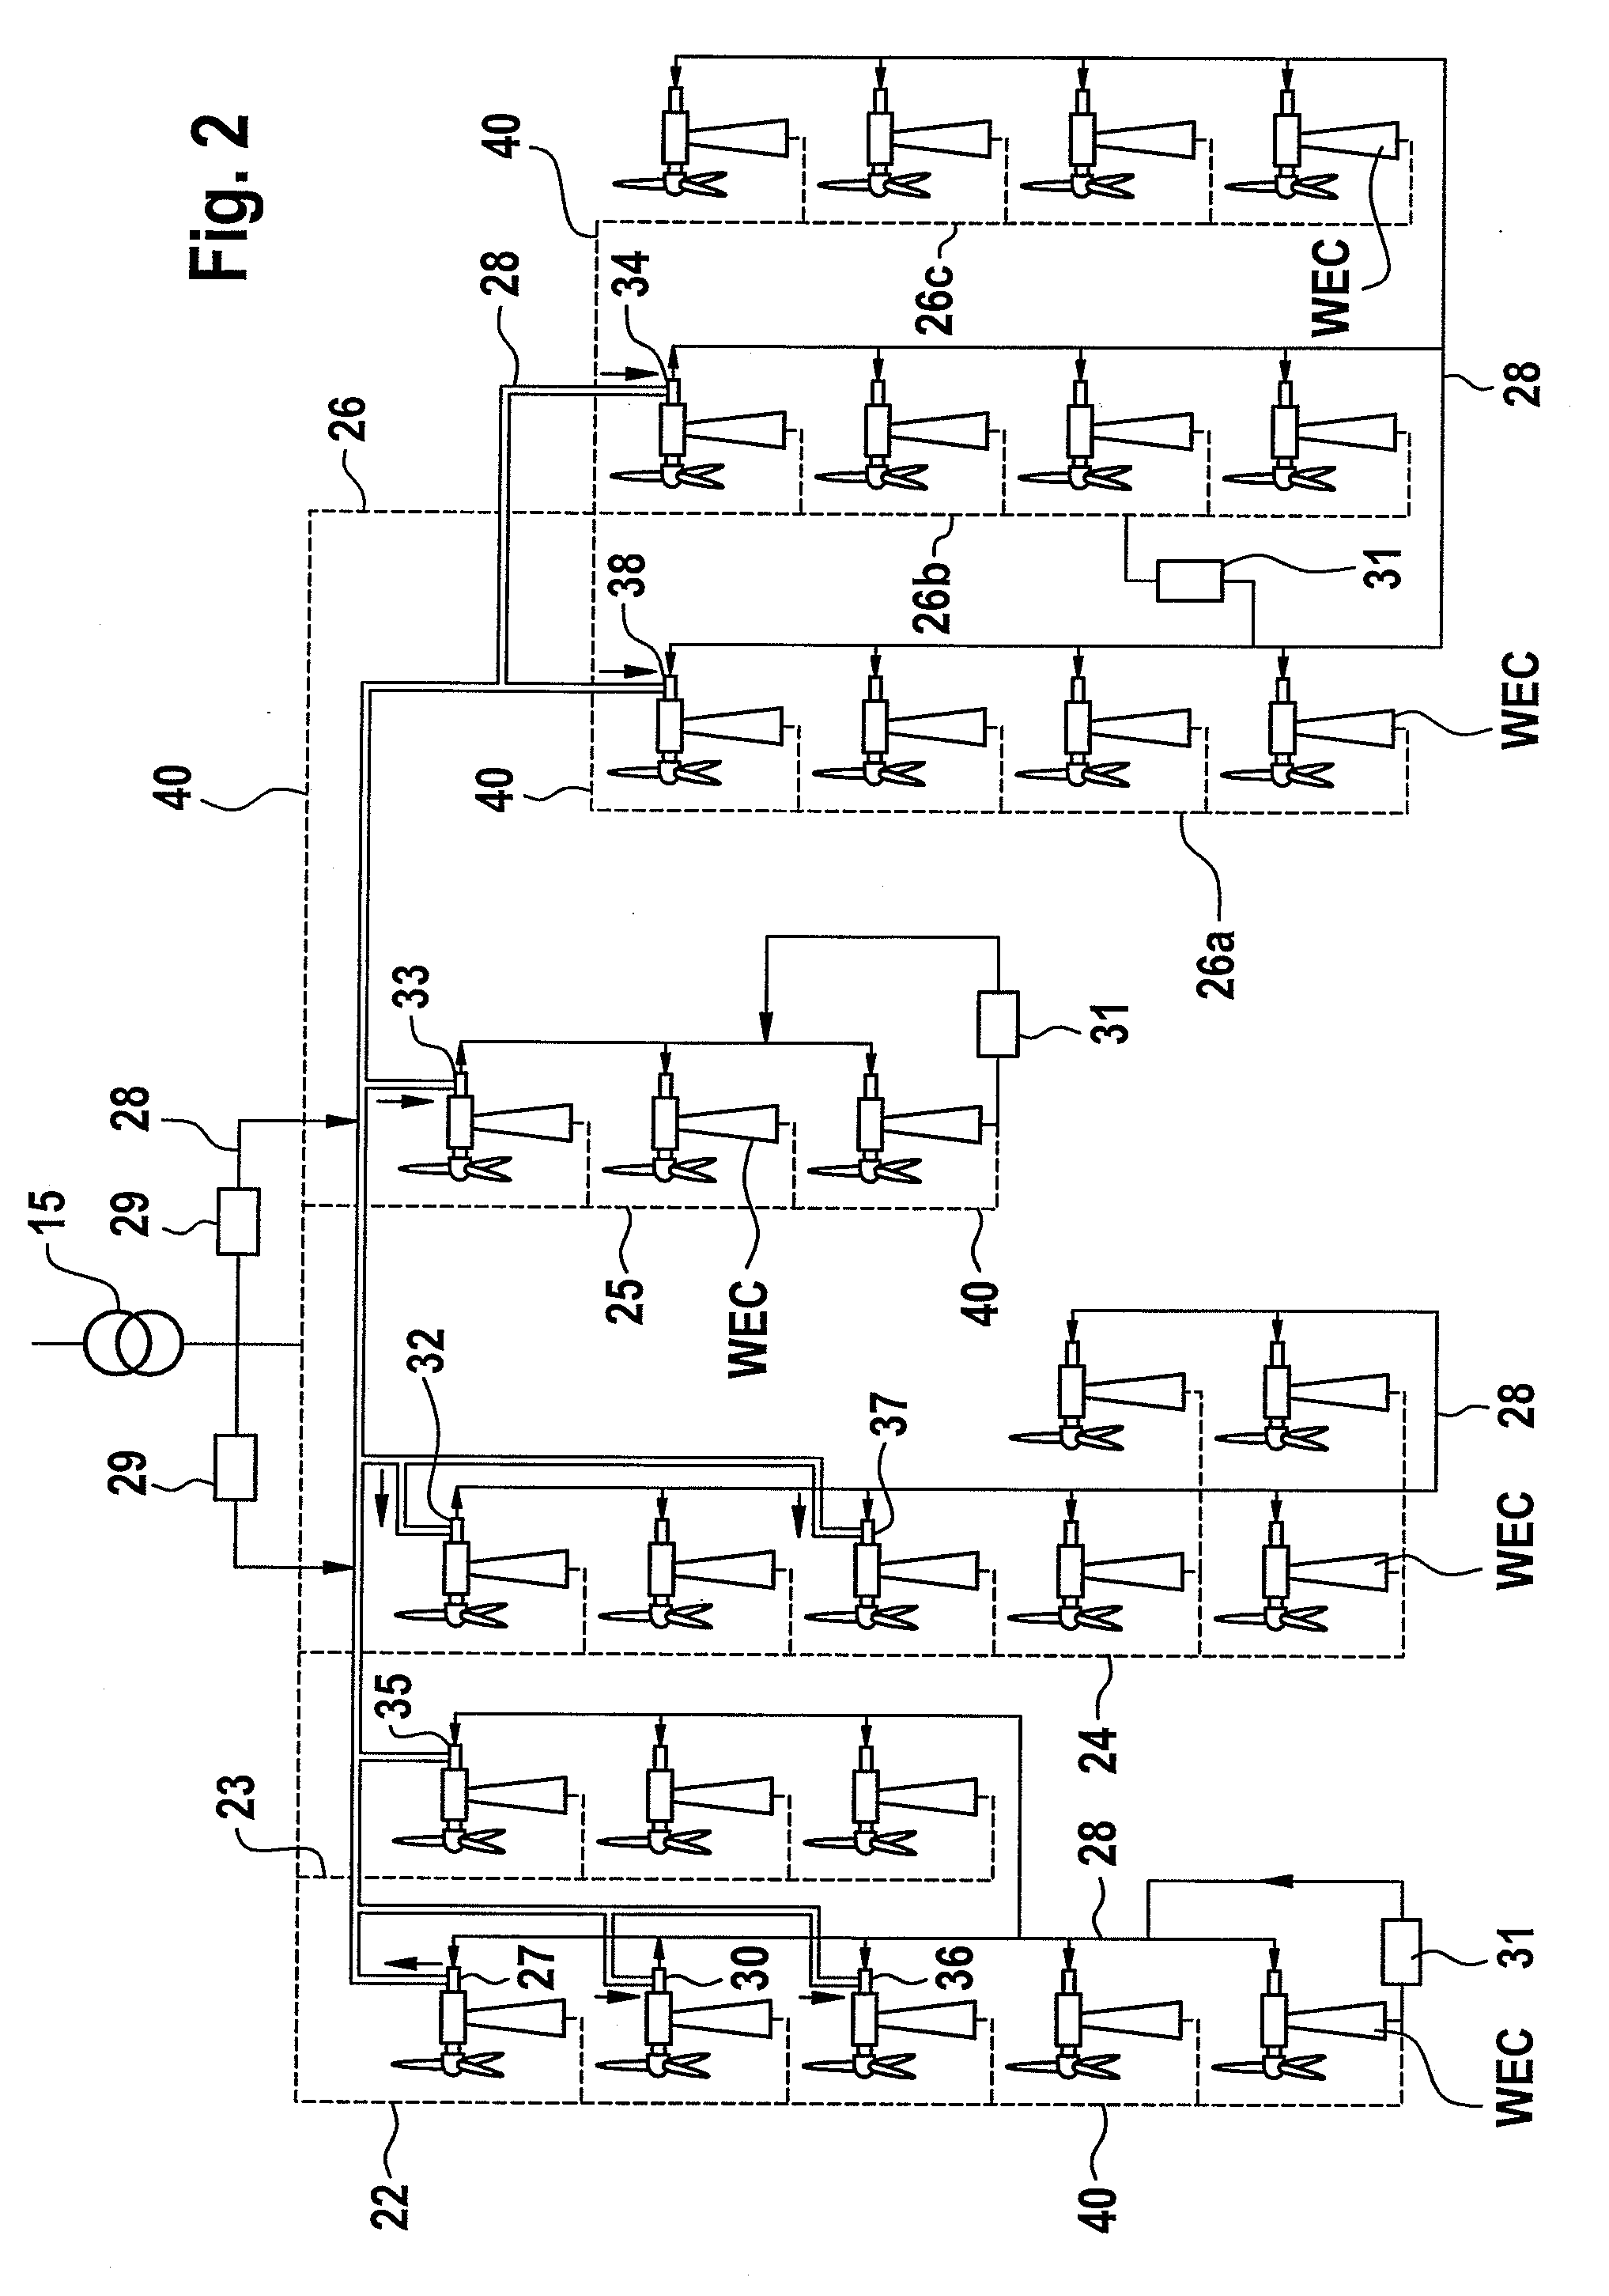 Wind farm and method for controlling a wind farm